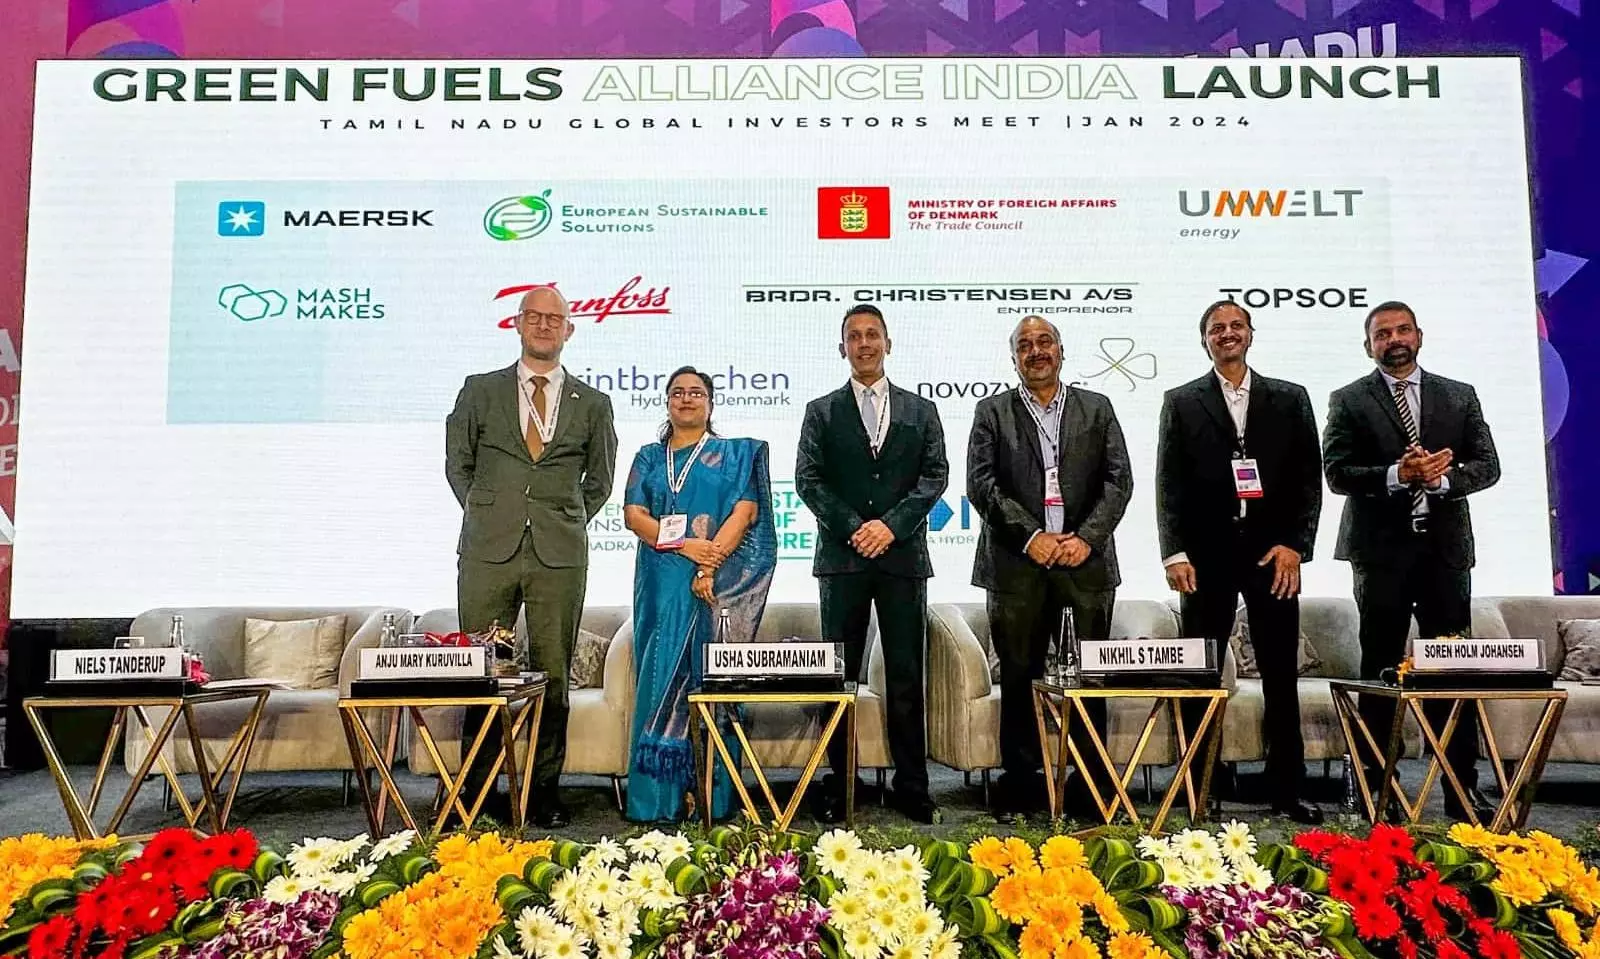 Denmark announces alliance for green fuels in India